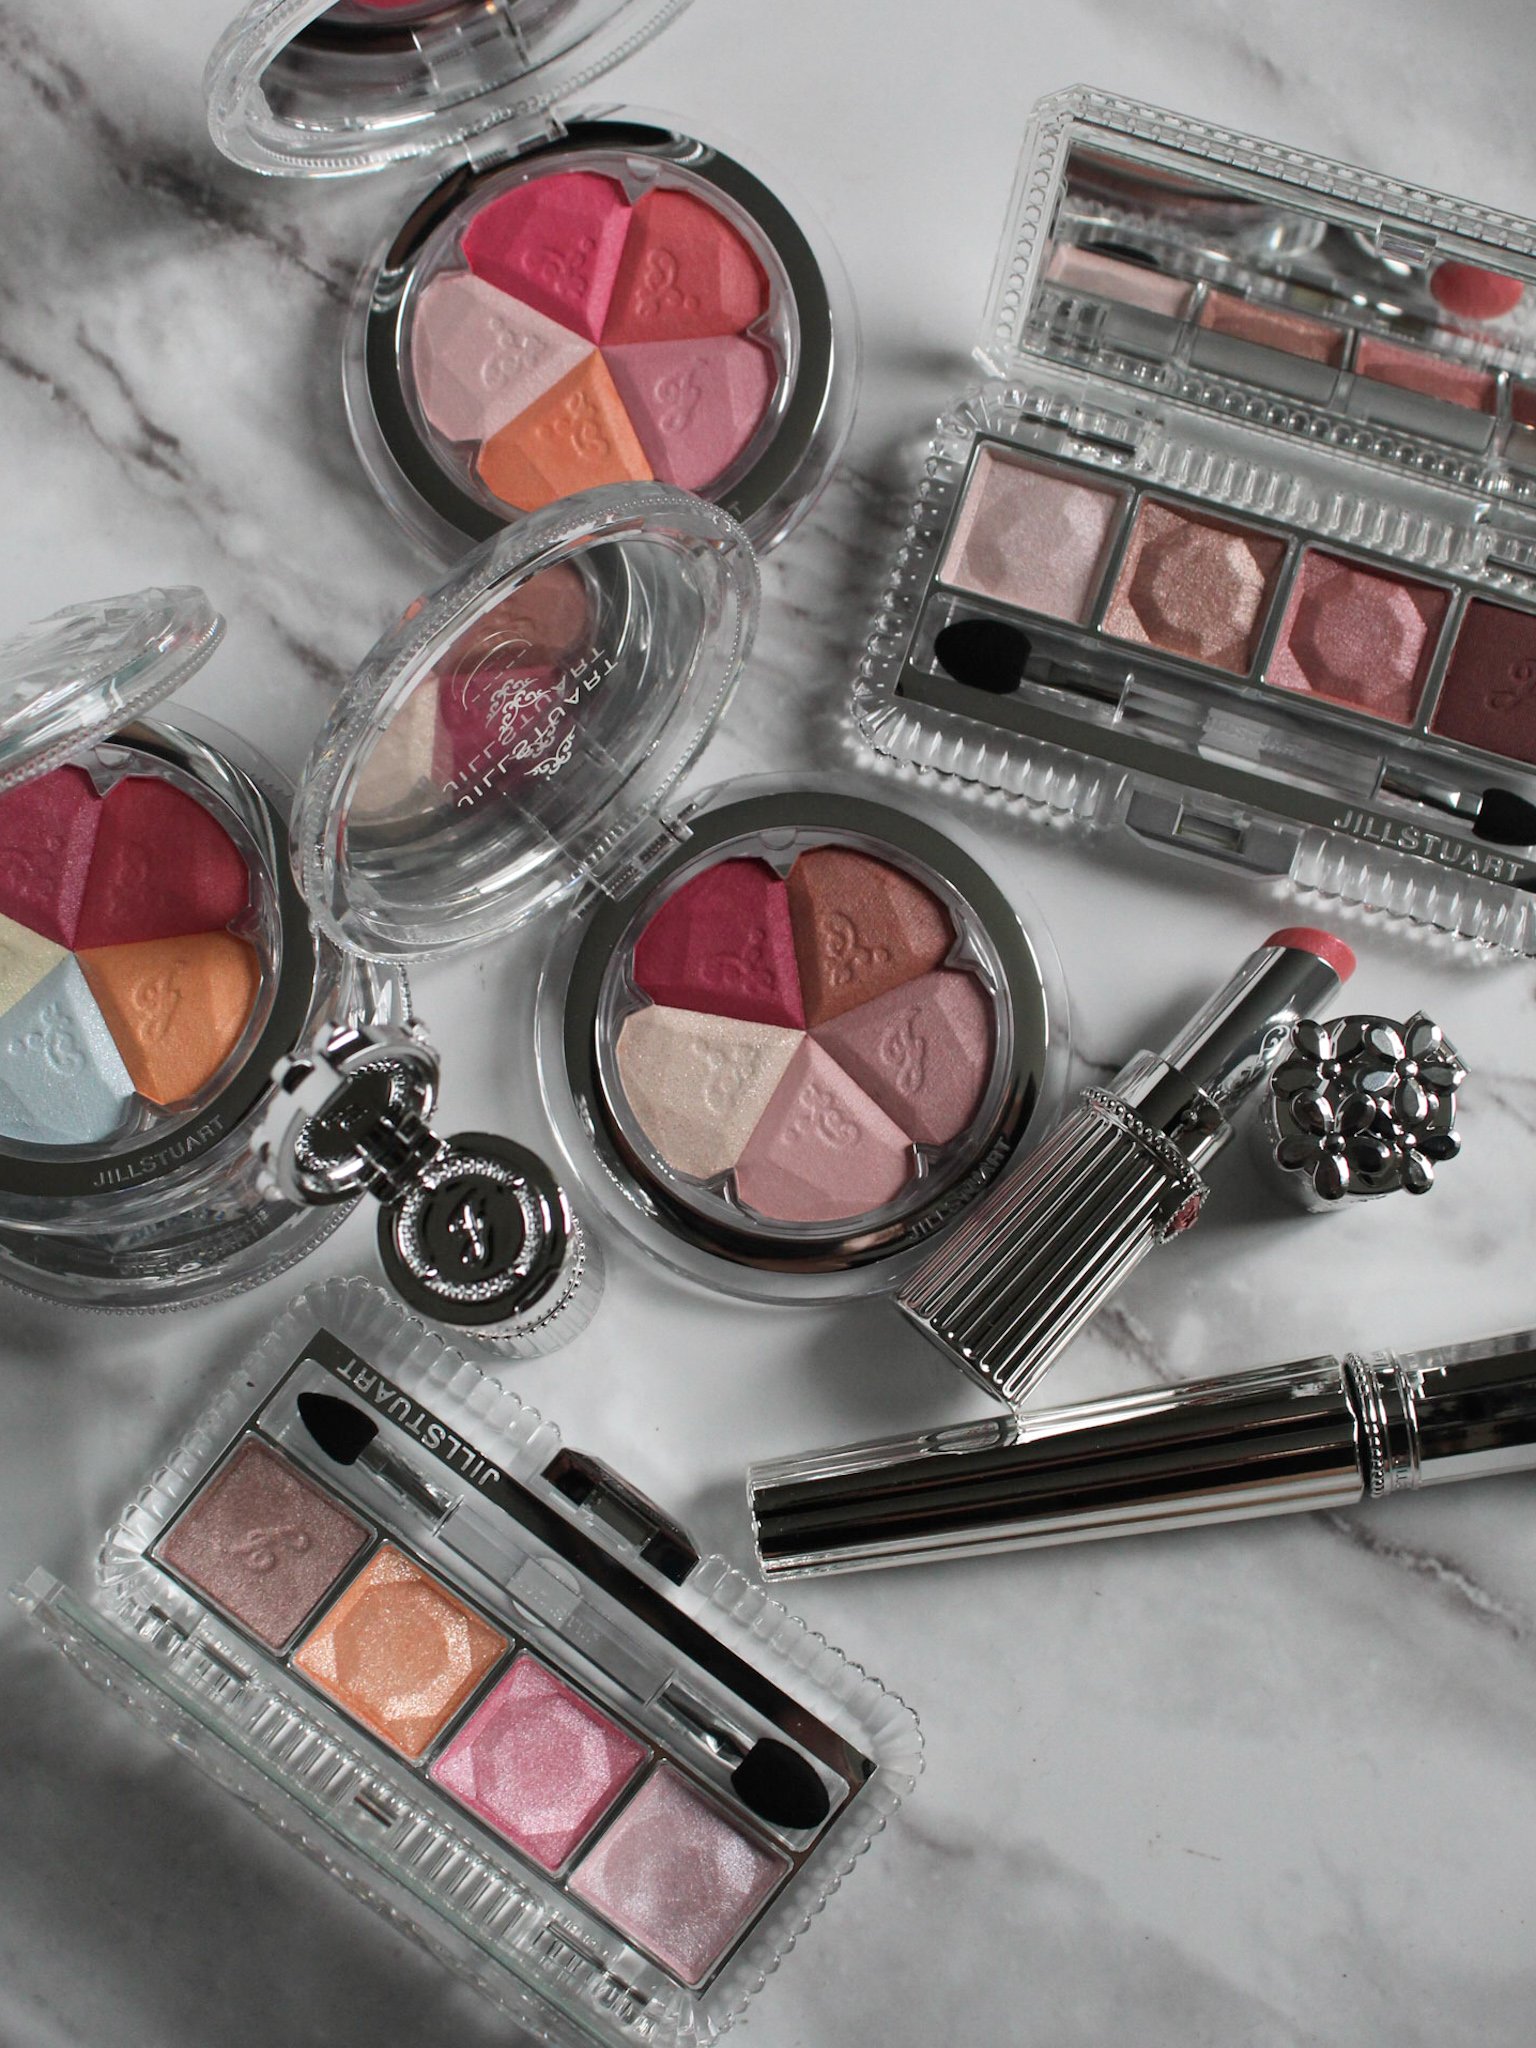 Jill Stuart Brilliant Bloom Collection: Review and Swatches